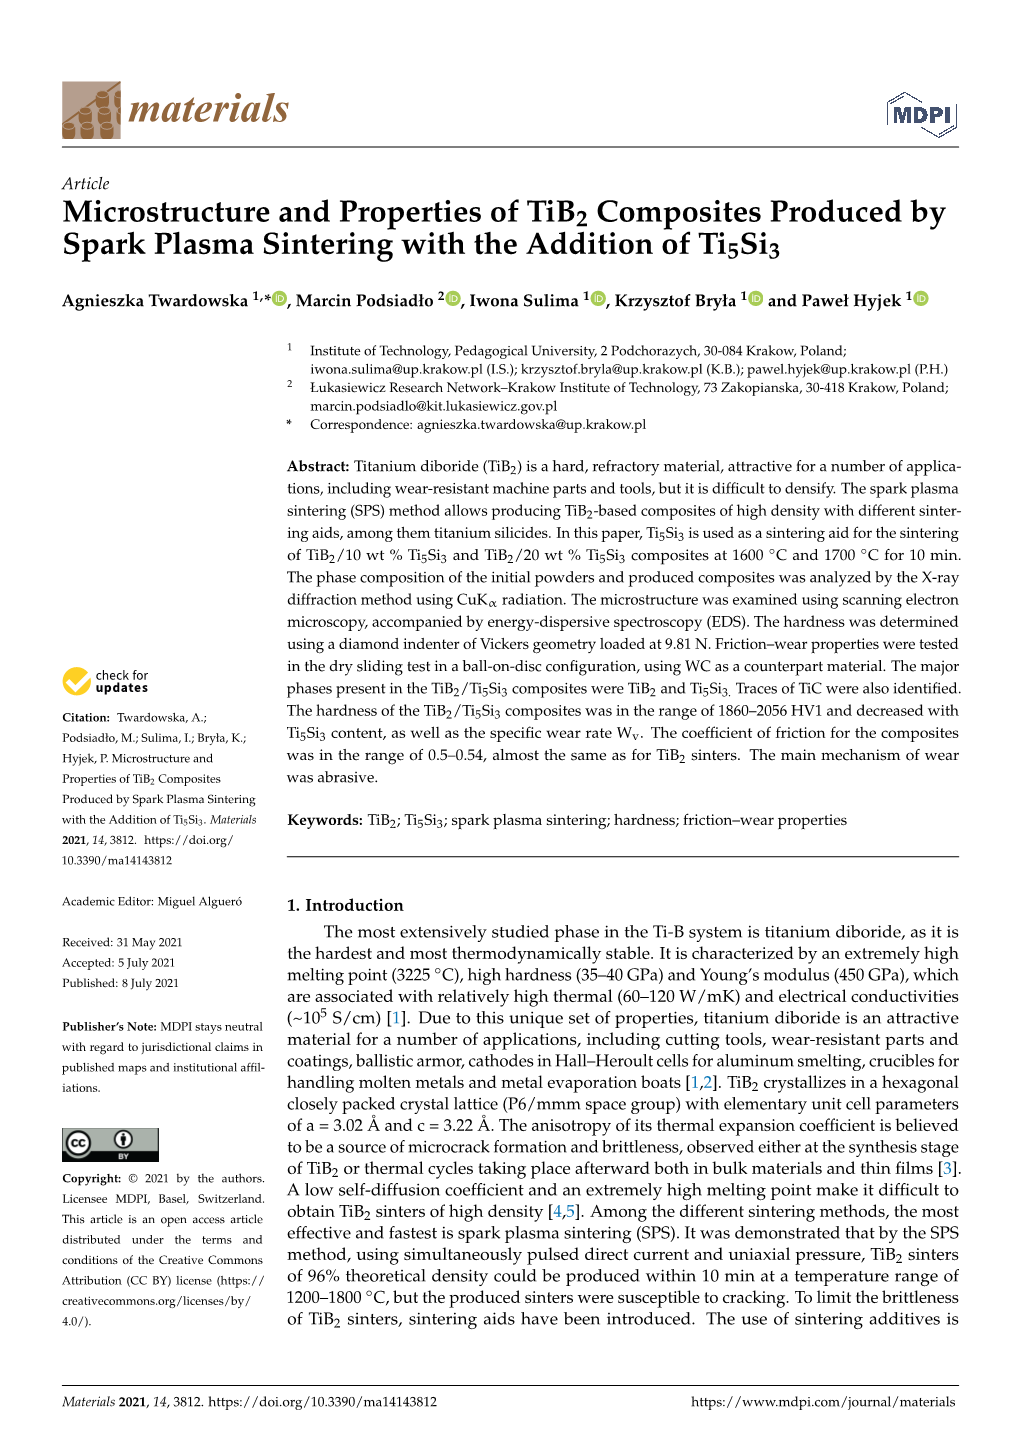 Microstructure and Properties of Tib2 Composites Produced by Spark Plasma Sintering with the Addition of Ti5si3